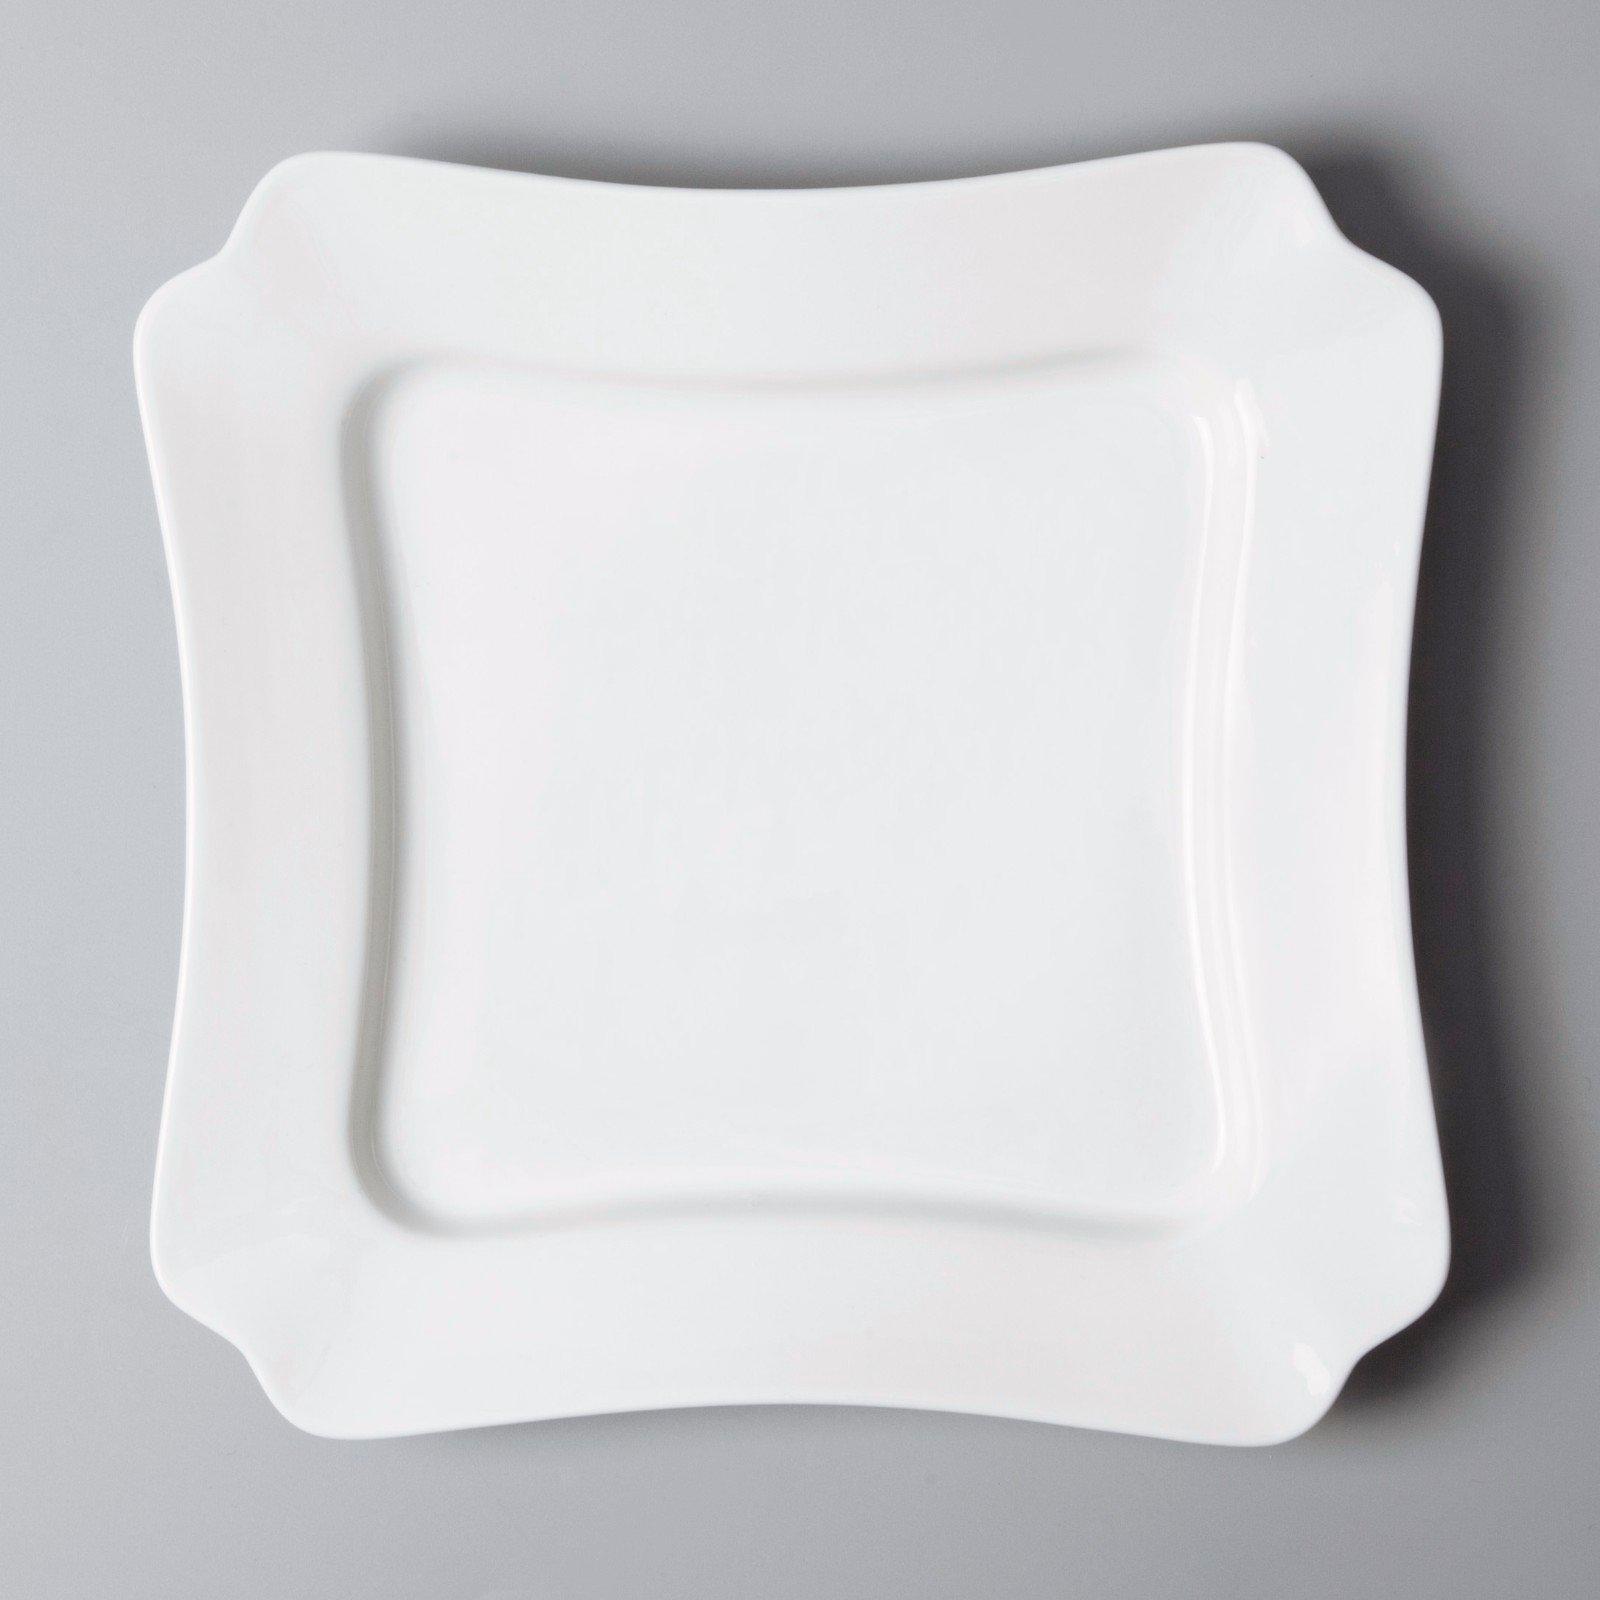 restaurant dining ware french style for home Two Eight-2